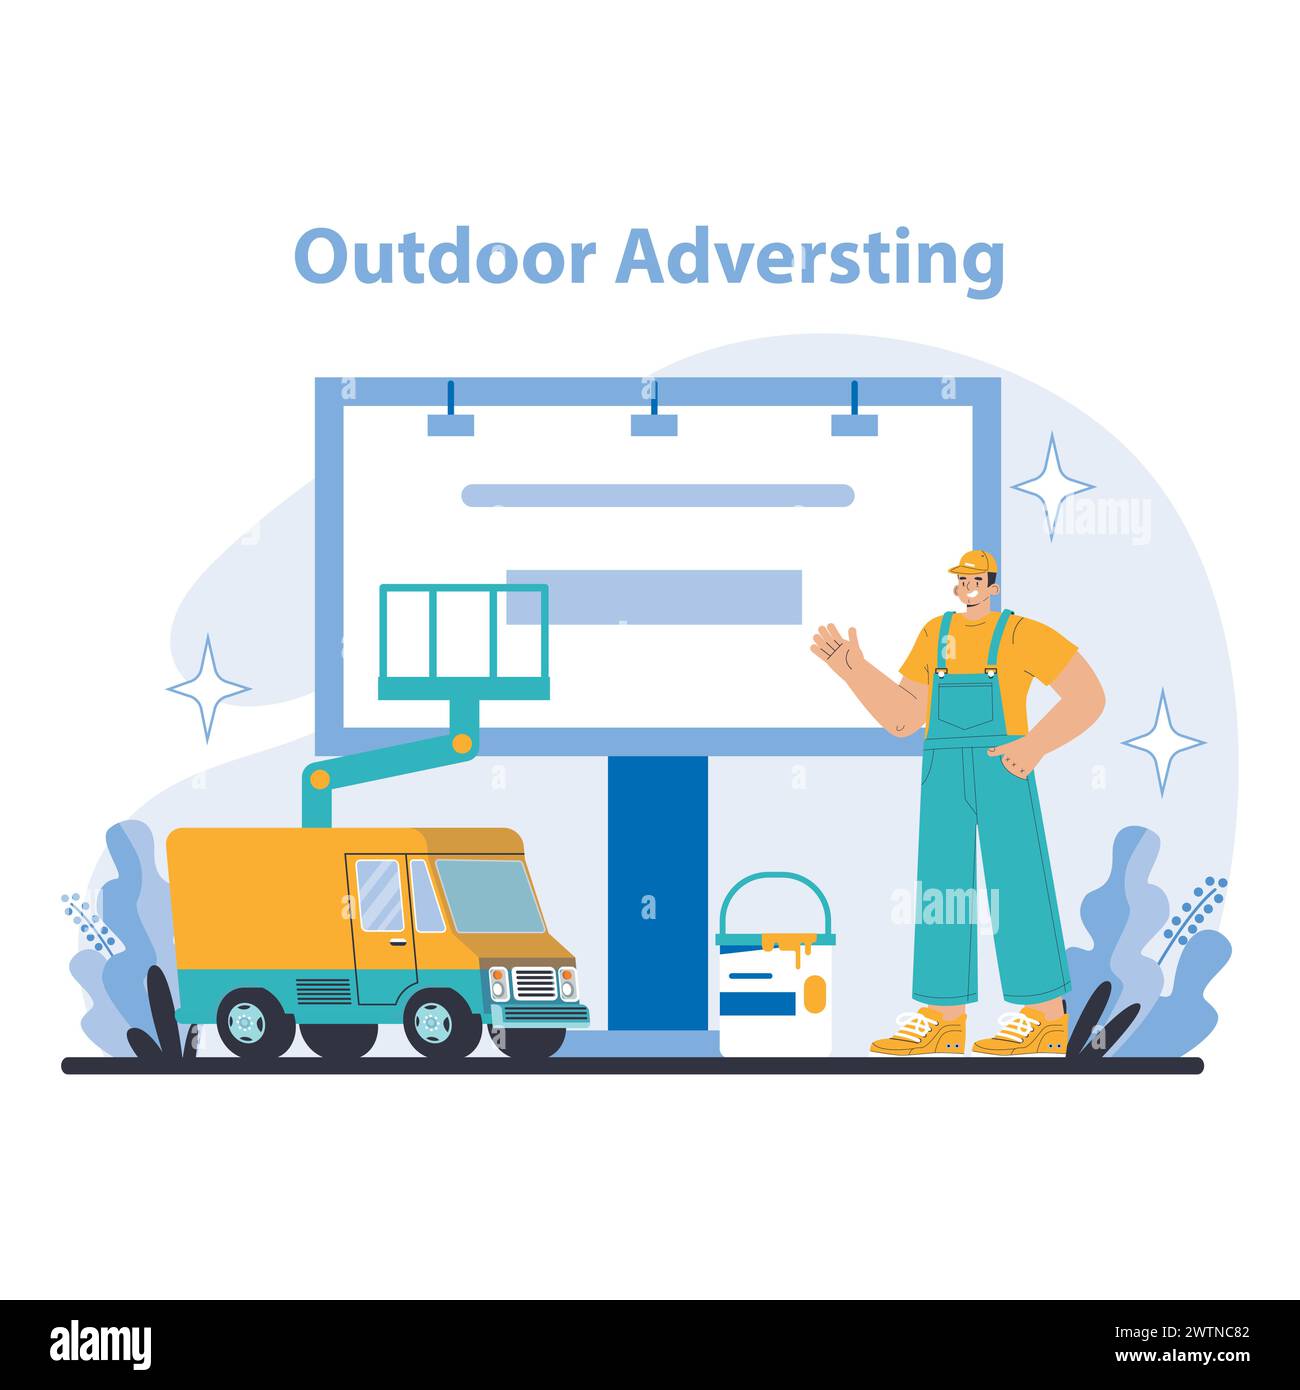 Outdoor Advertising concept. Impactful visual marketing strategies. Billboard advertising and mobile ads. Brand exposure in public spaces. Flat vector illustration. Stock Vector